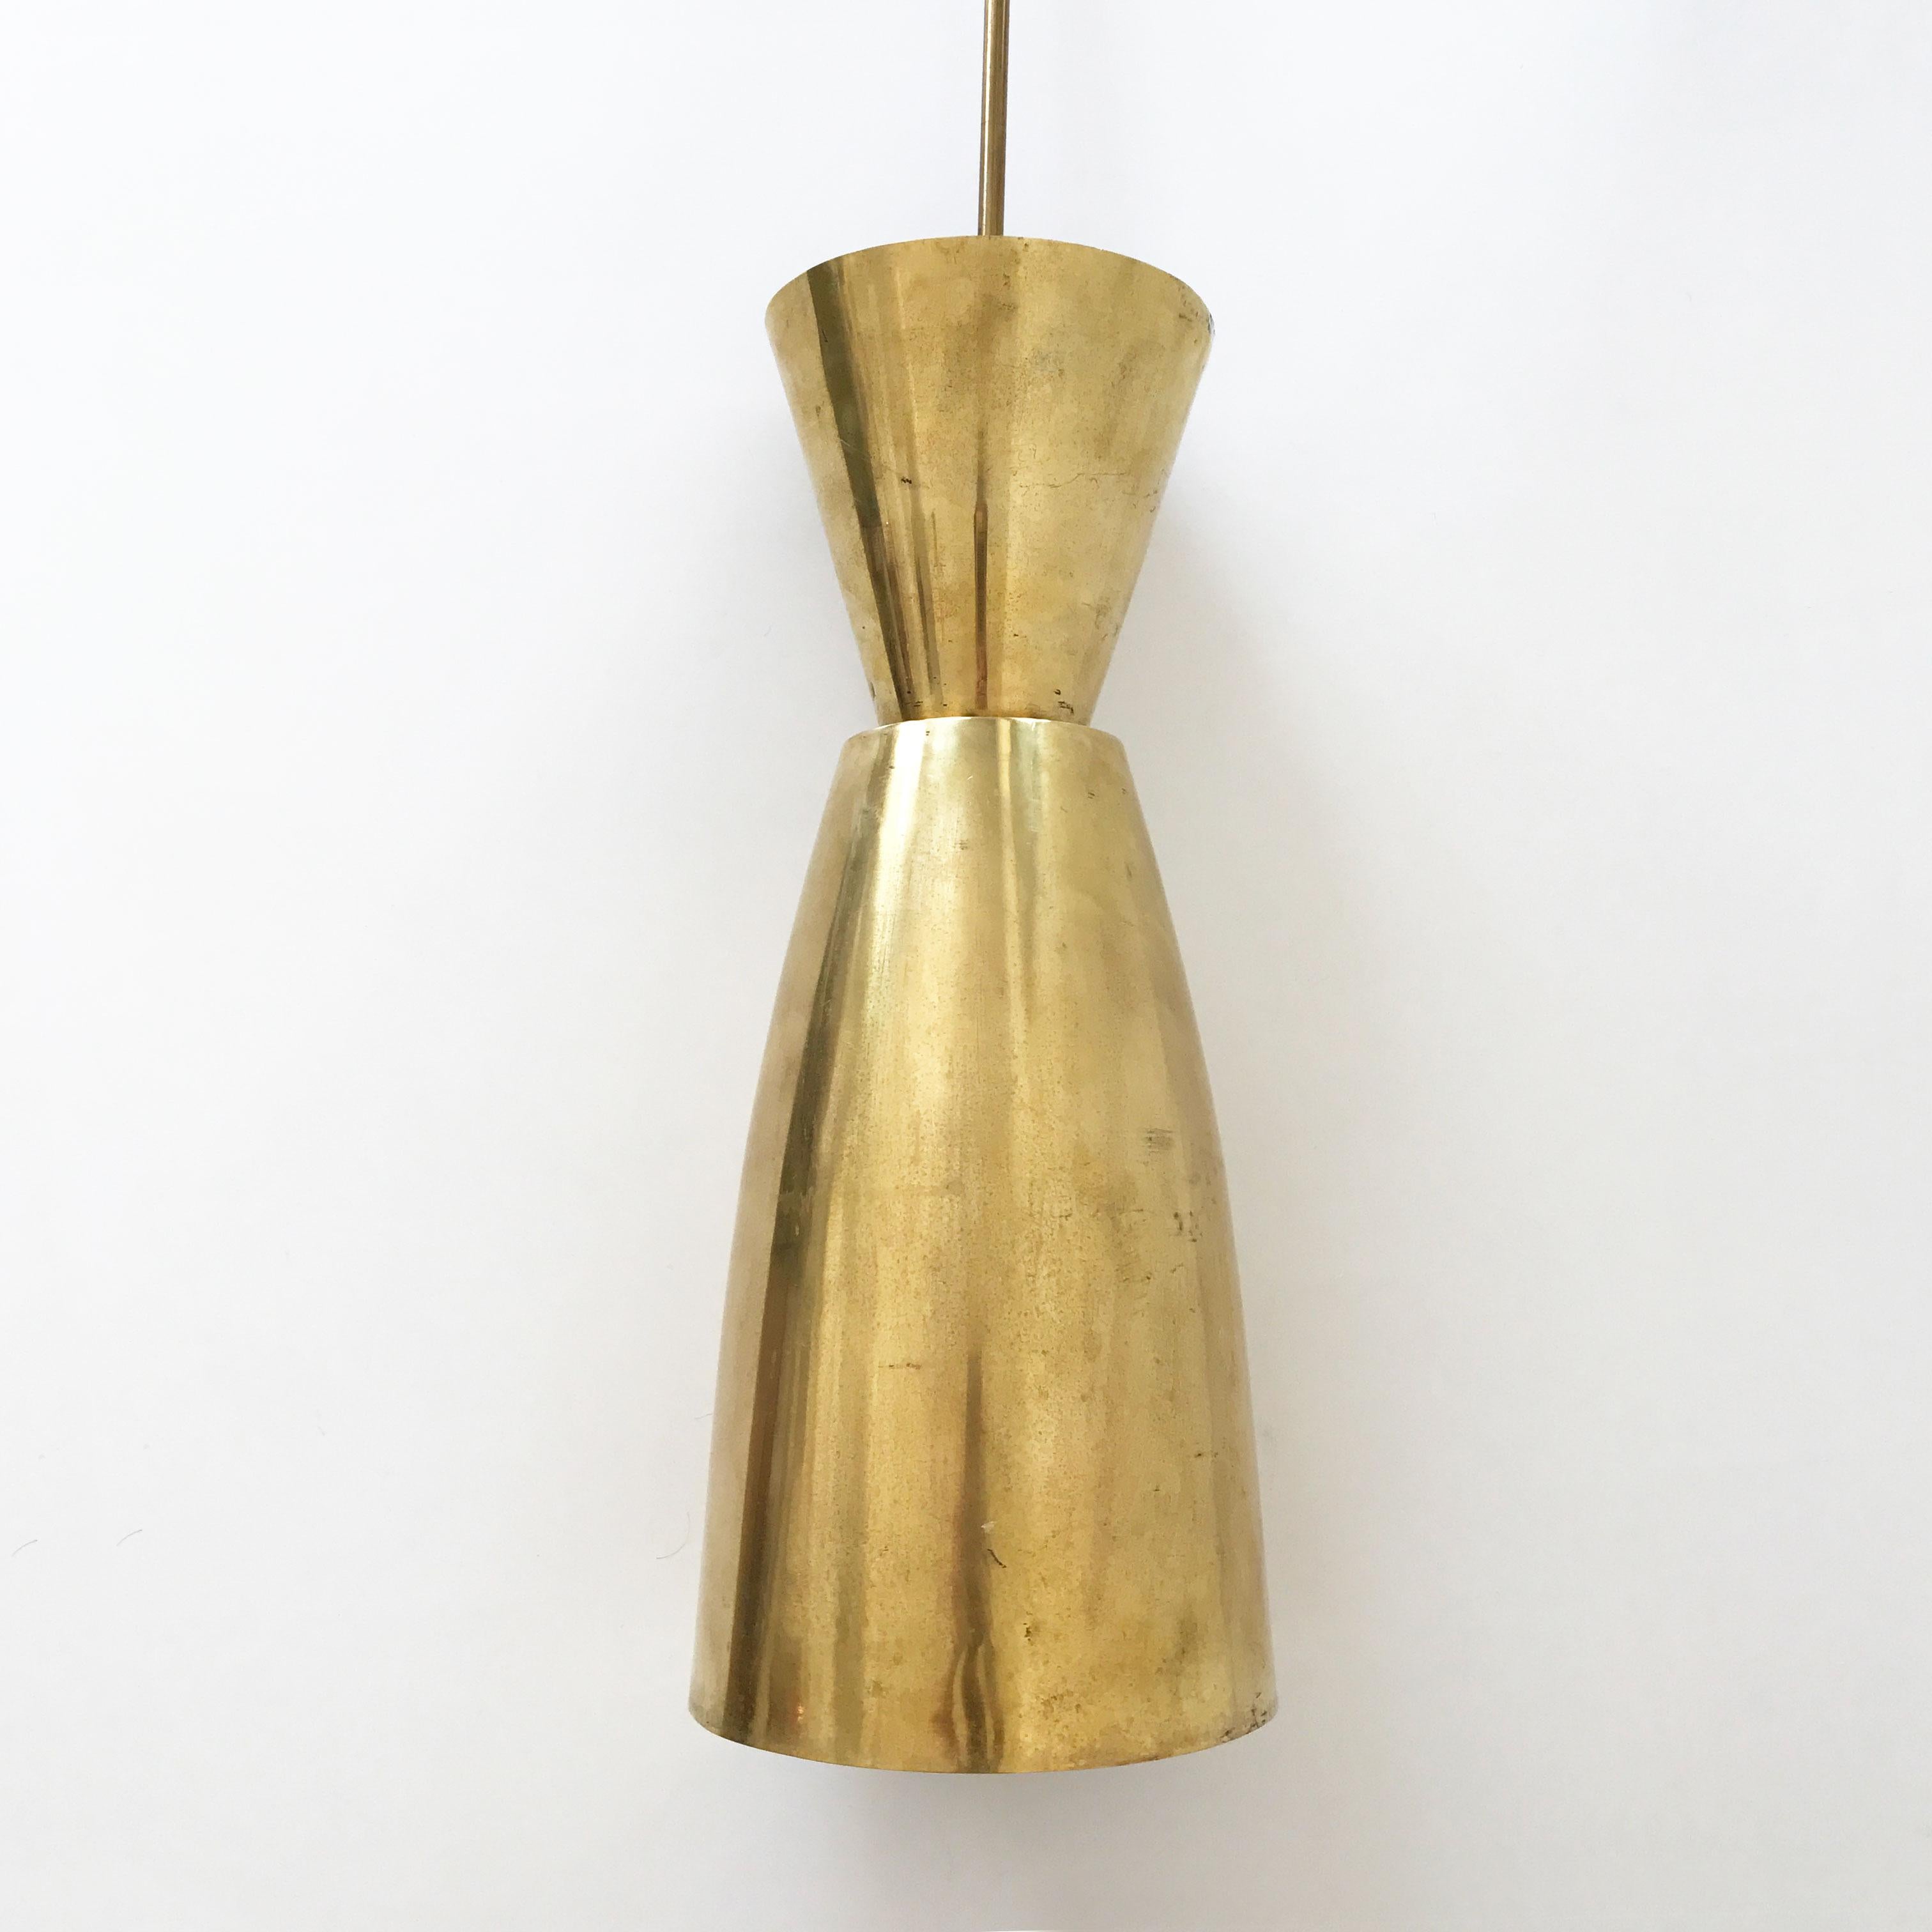 Large Mid-Century Modern Diabolo Brass Pendant Lamp, 1950s, Germany For Sale 3